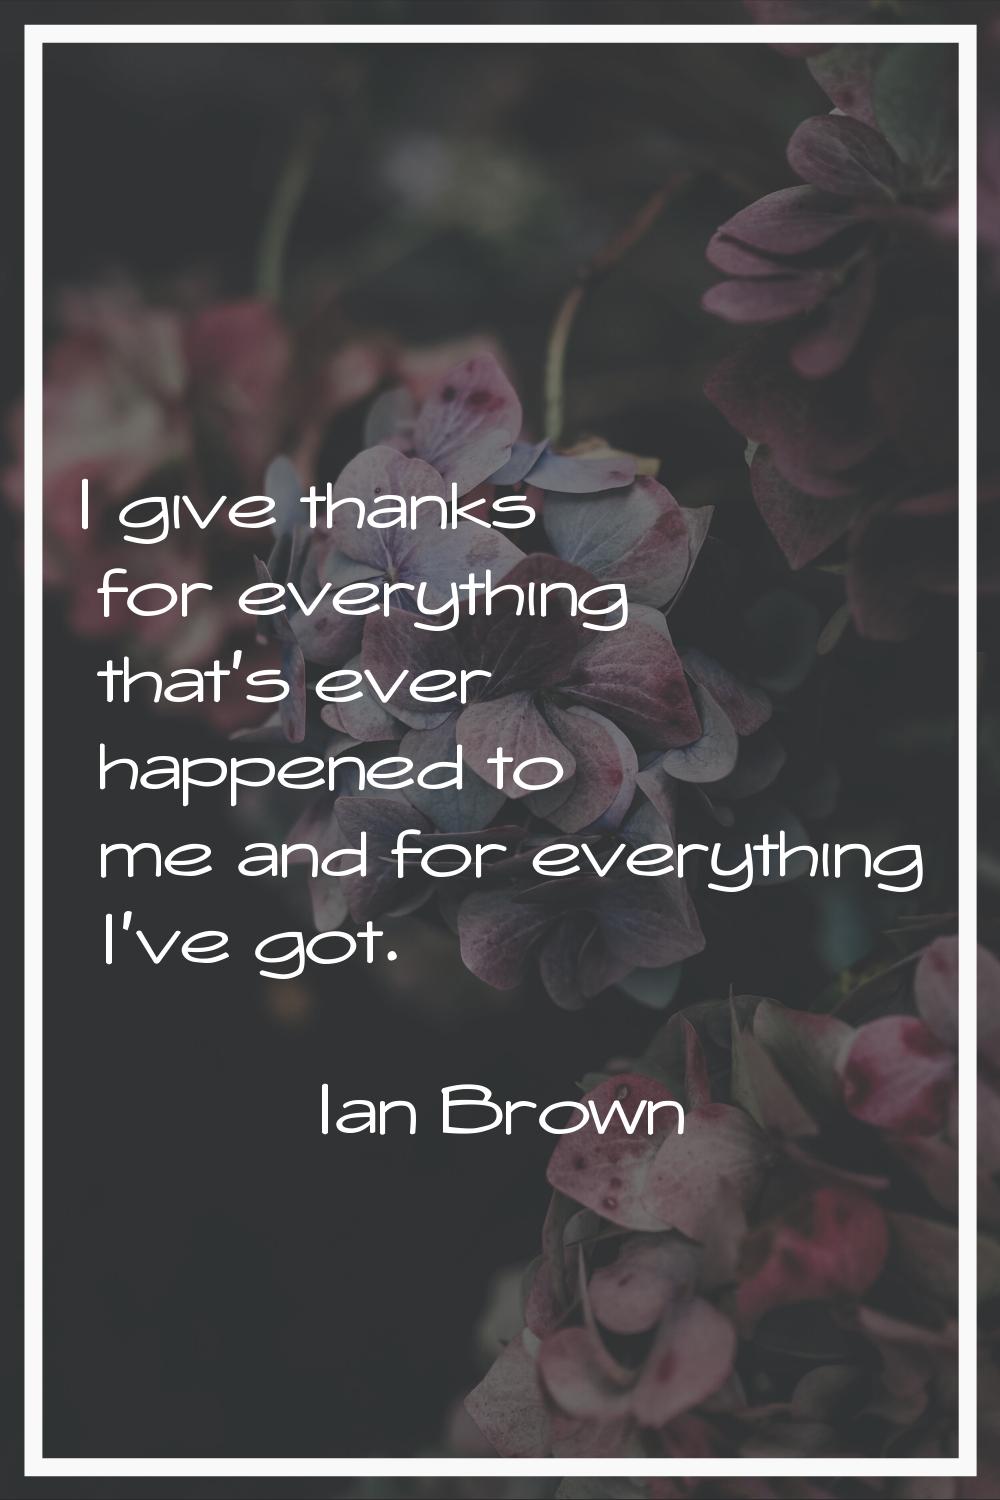 I give thanks for everything that's ever happened to me and for everything I've got.